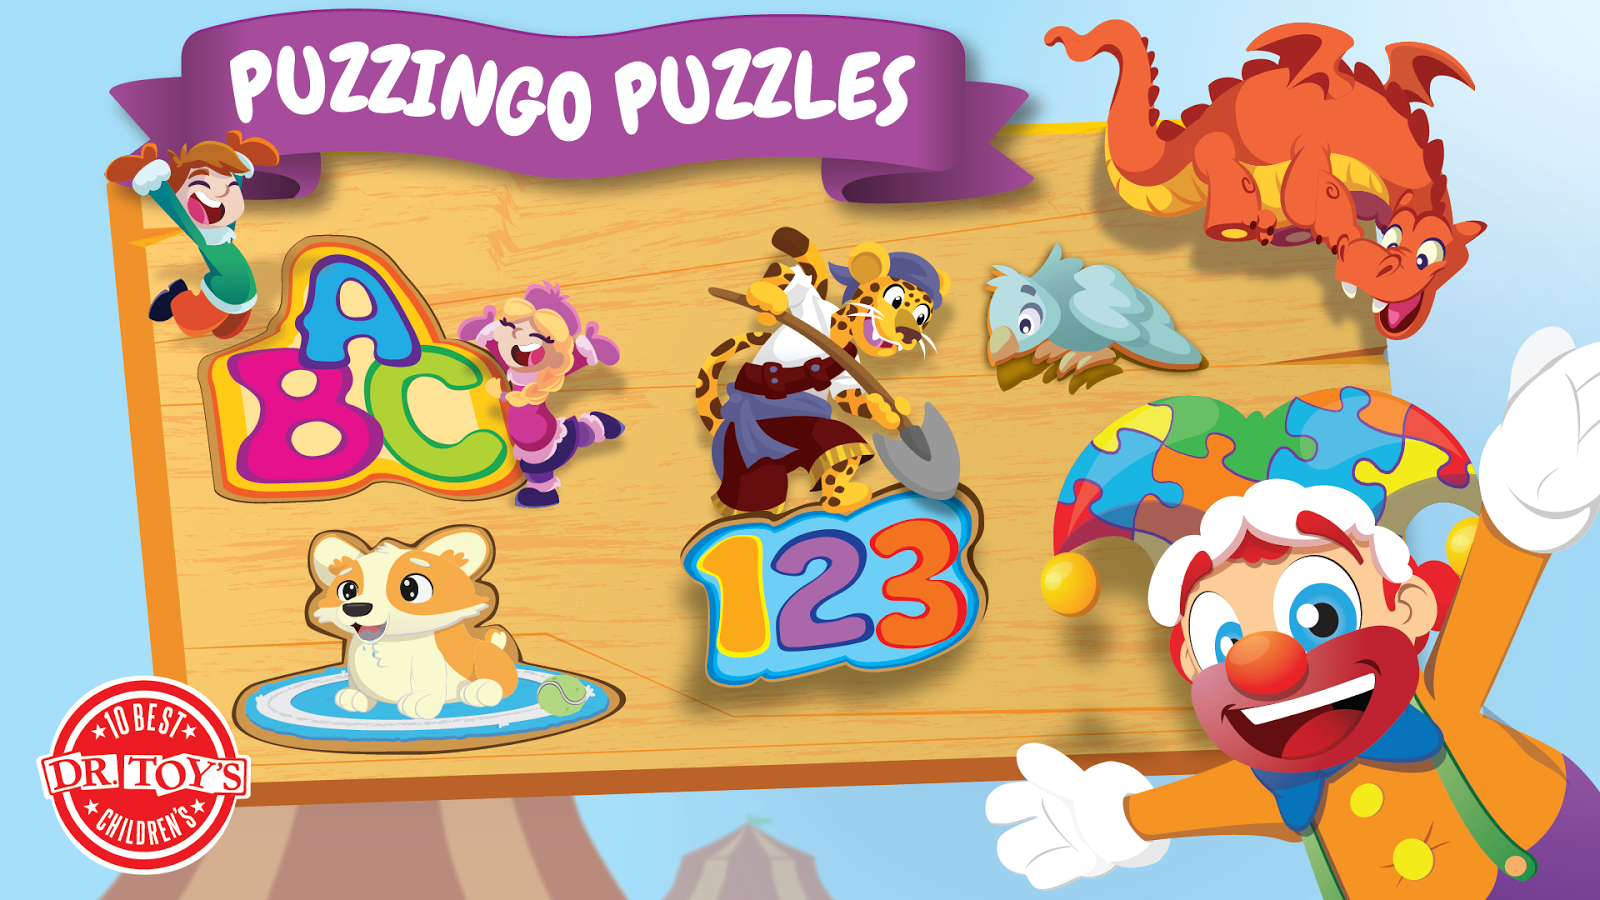 Puzzle Fun For The Kids With Puzzingo Puzzles Mommy Katie - sonic tails birthday party roblox bliss events ltd